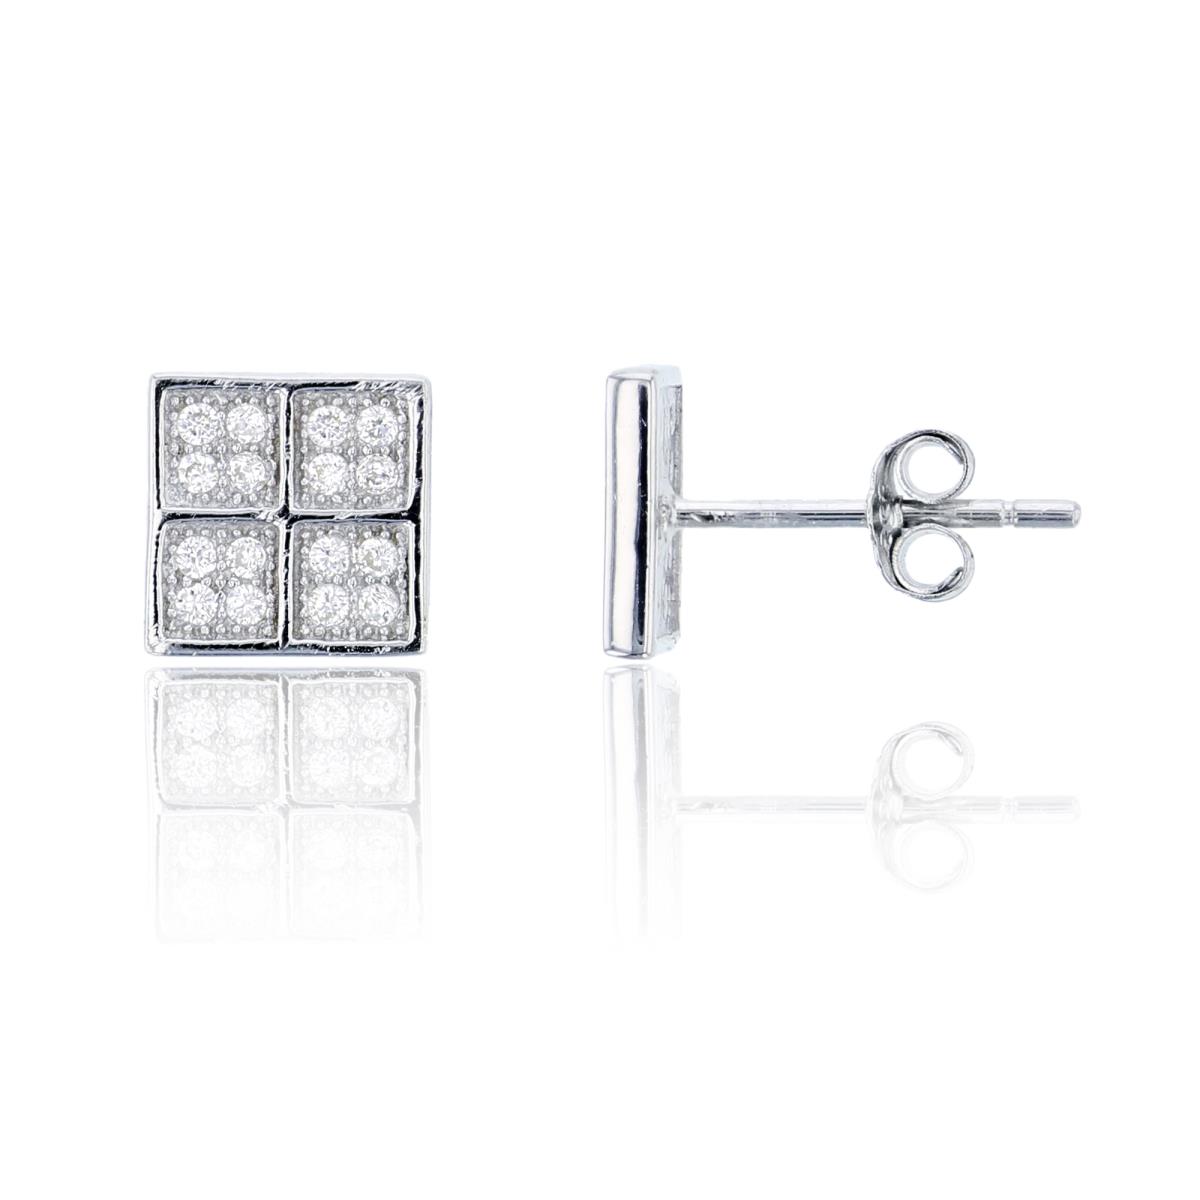 Sterling Silver 7.7x7.7mm Square Stud Earrings